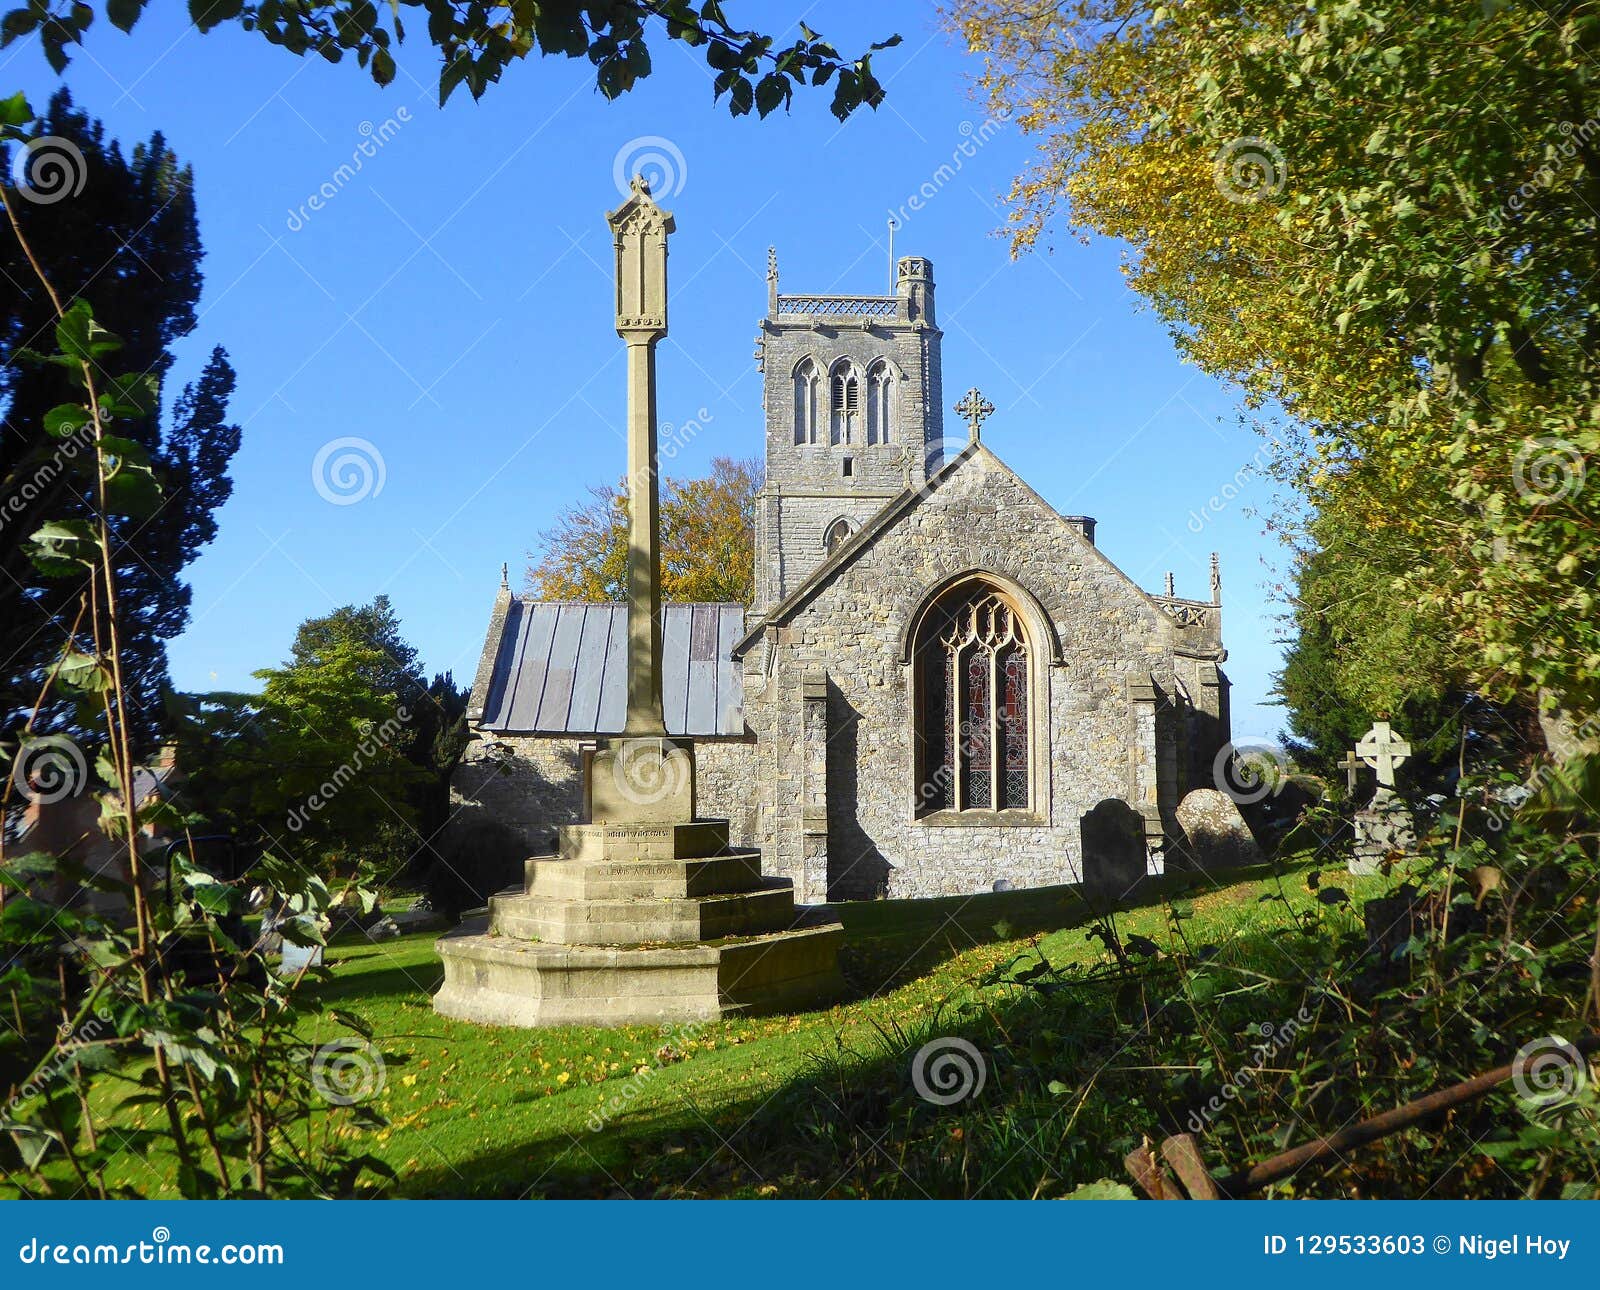 Medieval English Church and Churchyard Stock Image - Image of michael